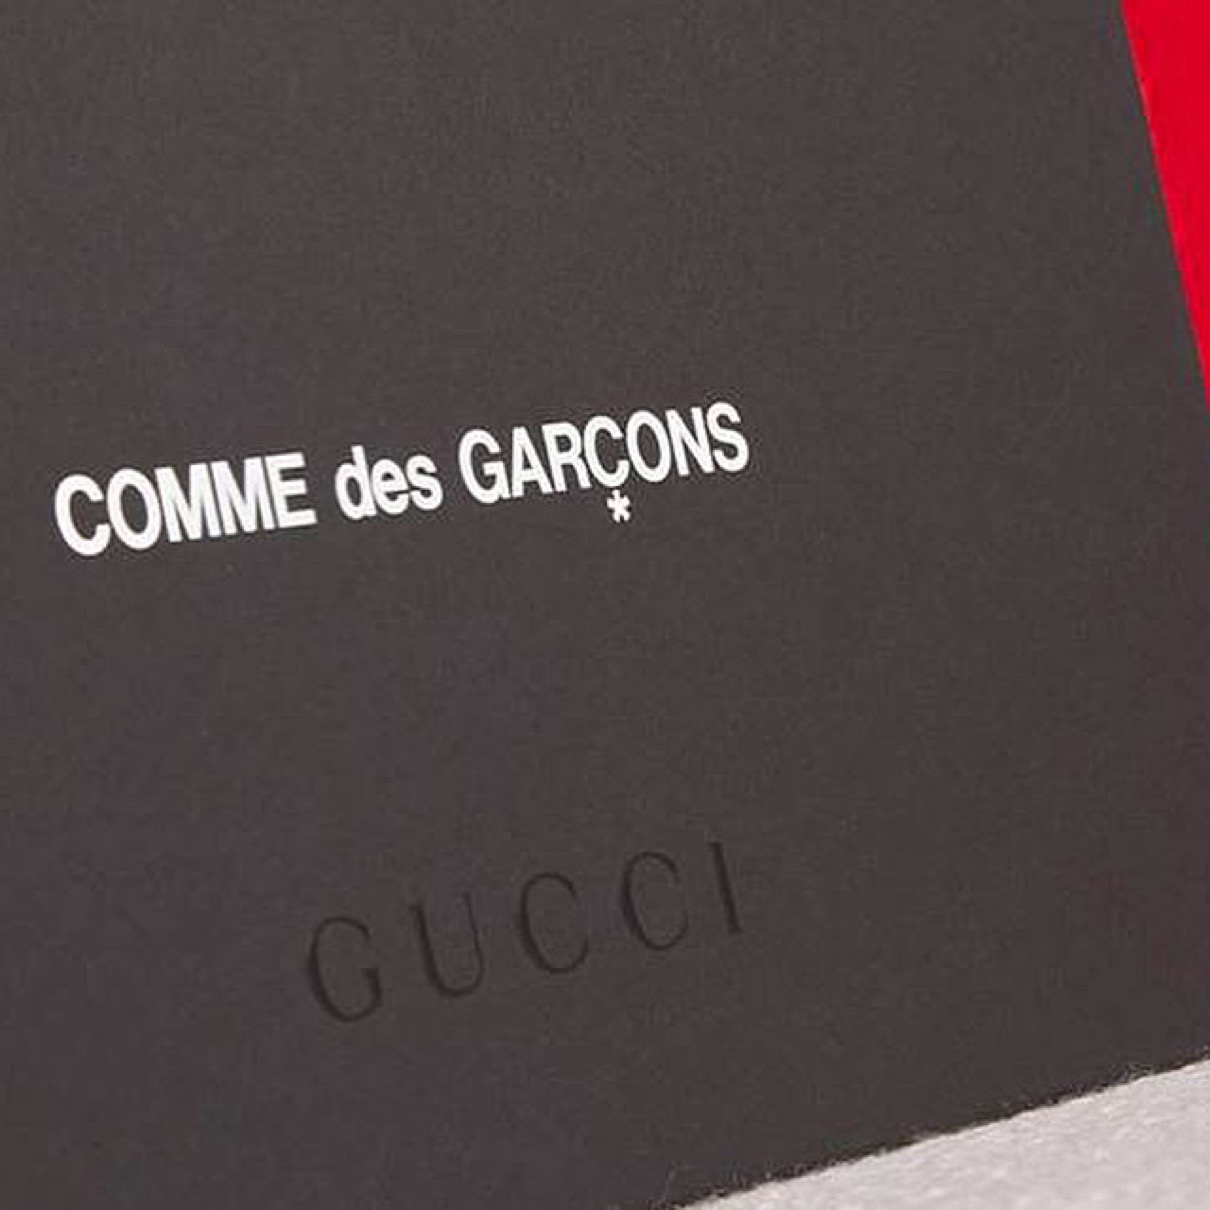 Gucci × Comme des Garçons コラボトートバッグ第3弾が10月15日に発売予定 | UP TO DATE